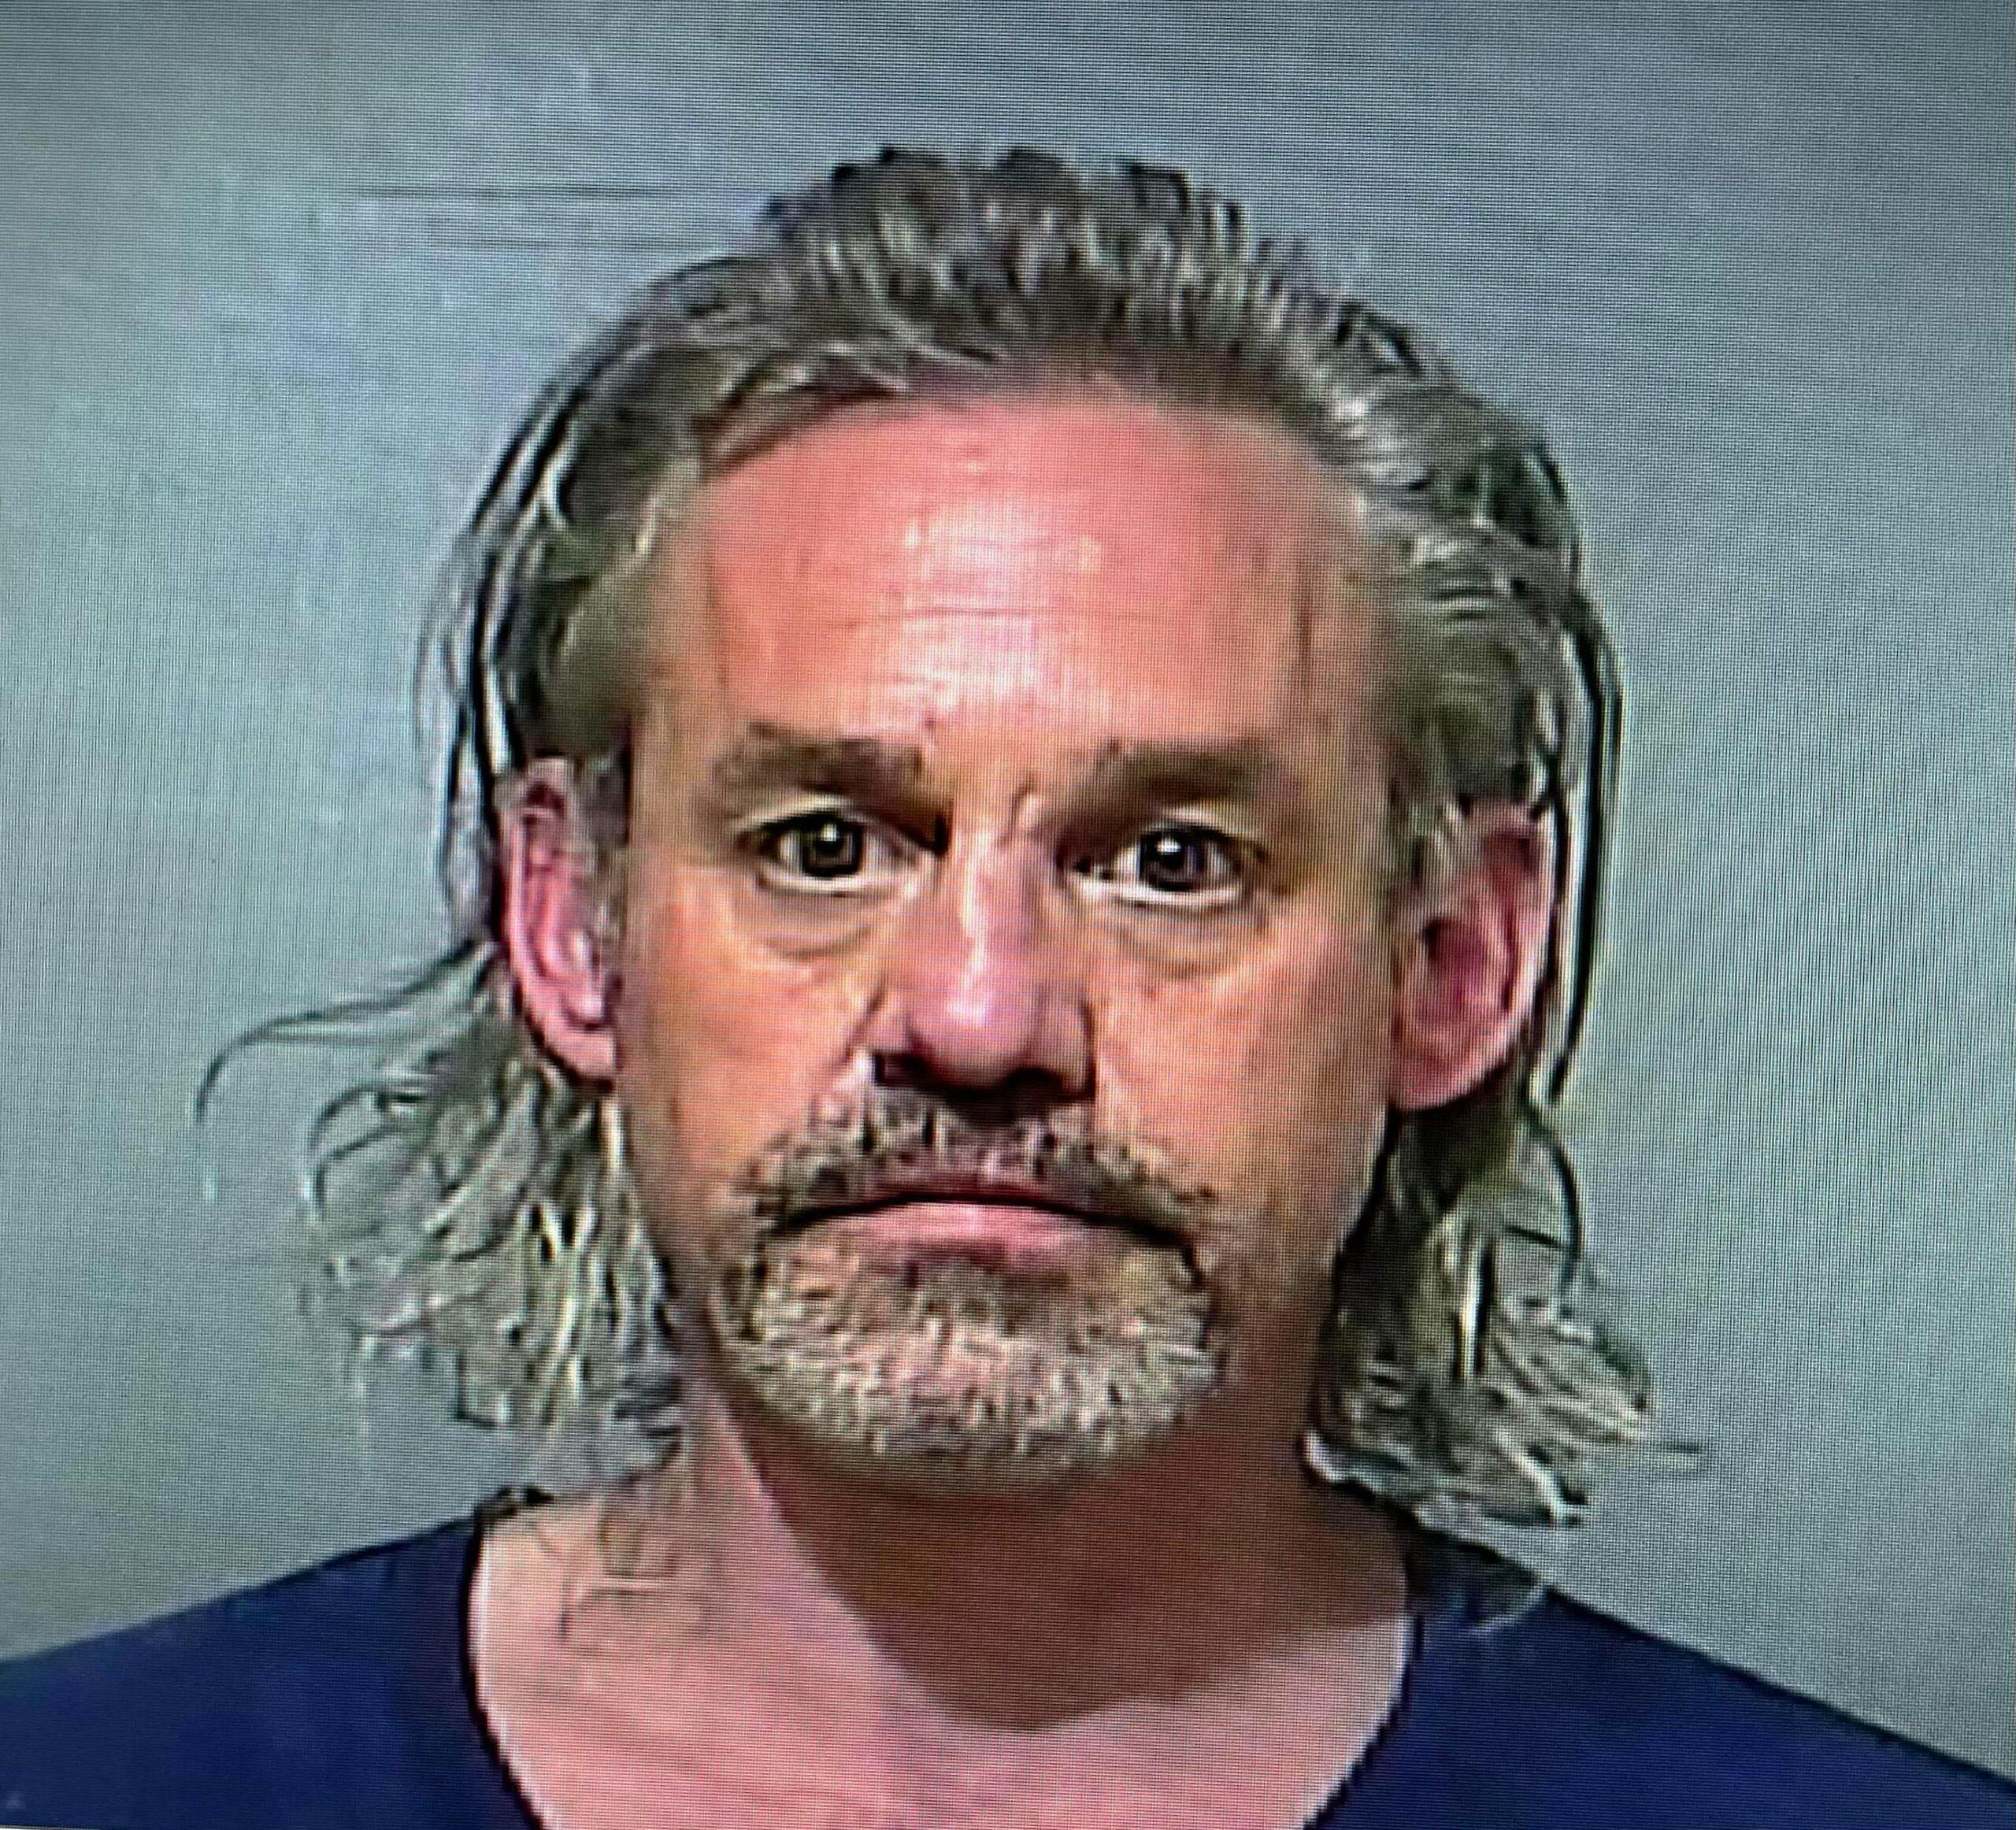 Former Buffy The Vampire Slayer star Nicholas Brendon looks unrecognizable in mug shot after arrest for allegedly obtaining prescription drugs by fraud